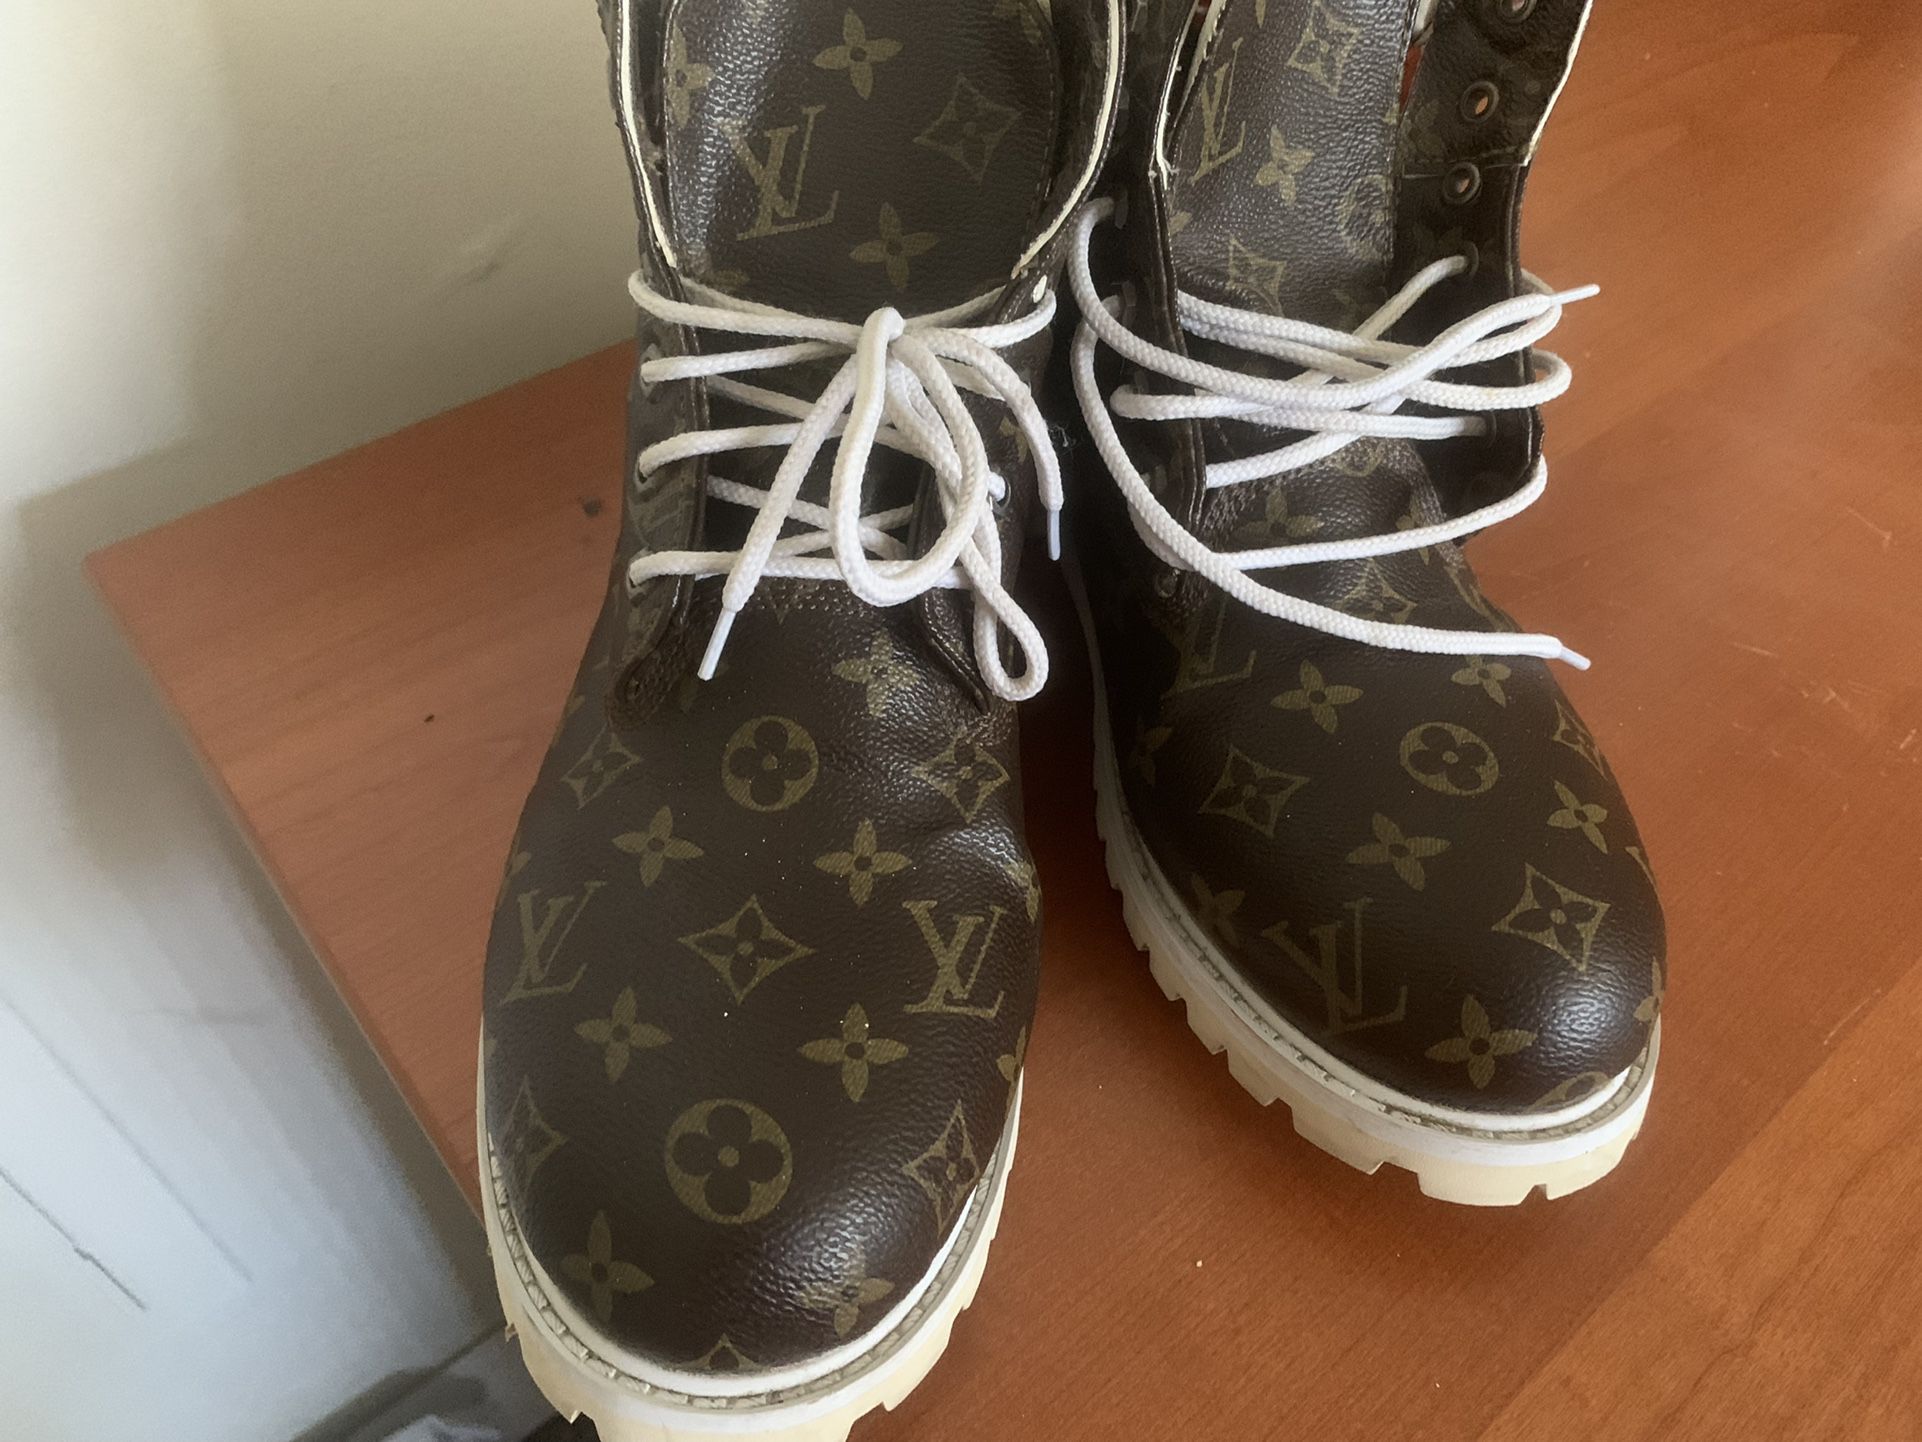 Pin by Gee on Boots  Louis vuitton boots, Boots, Timberland boots